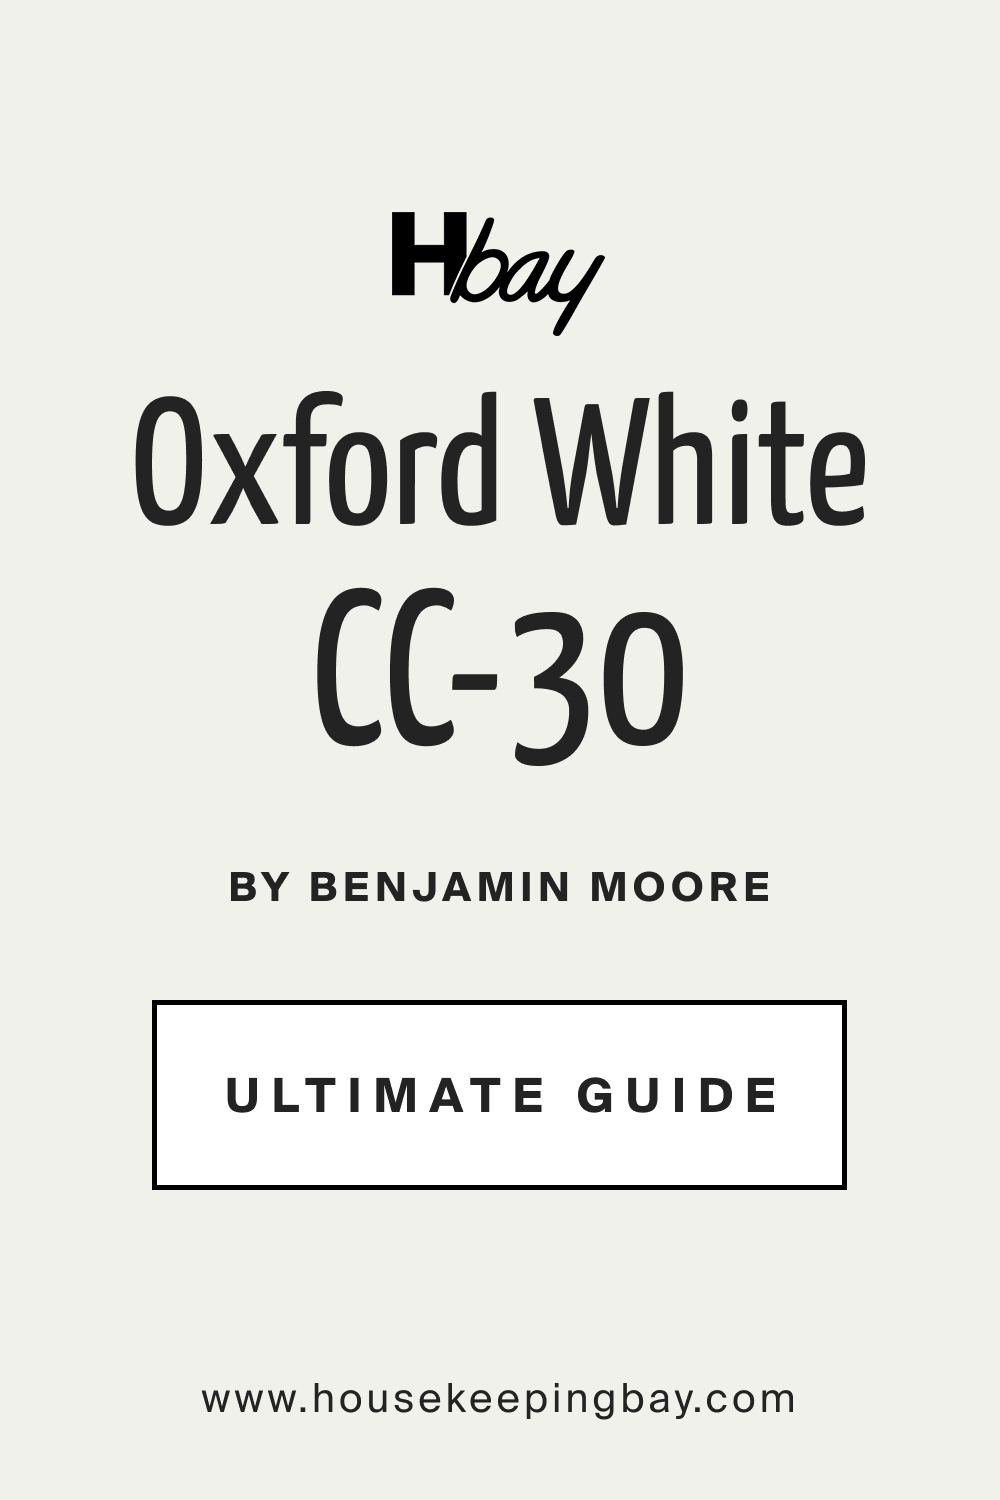 Oxford White CC 30 by Benjamin Moore Ultimate Guide